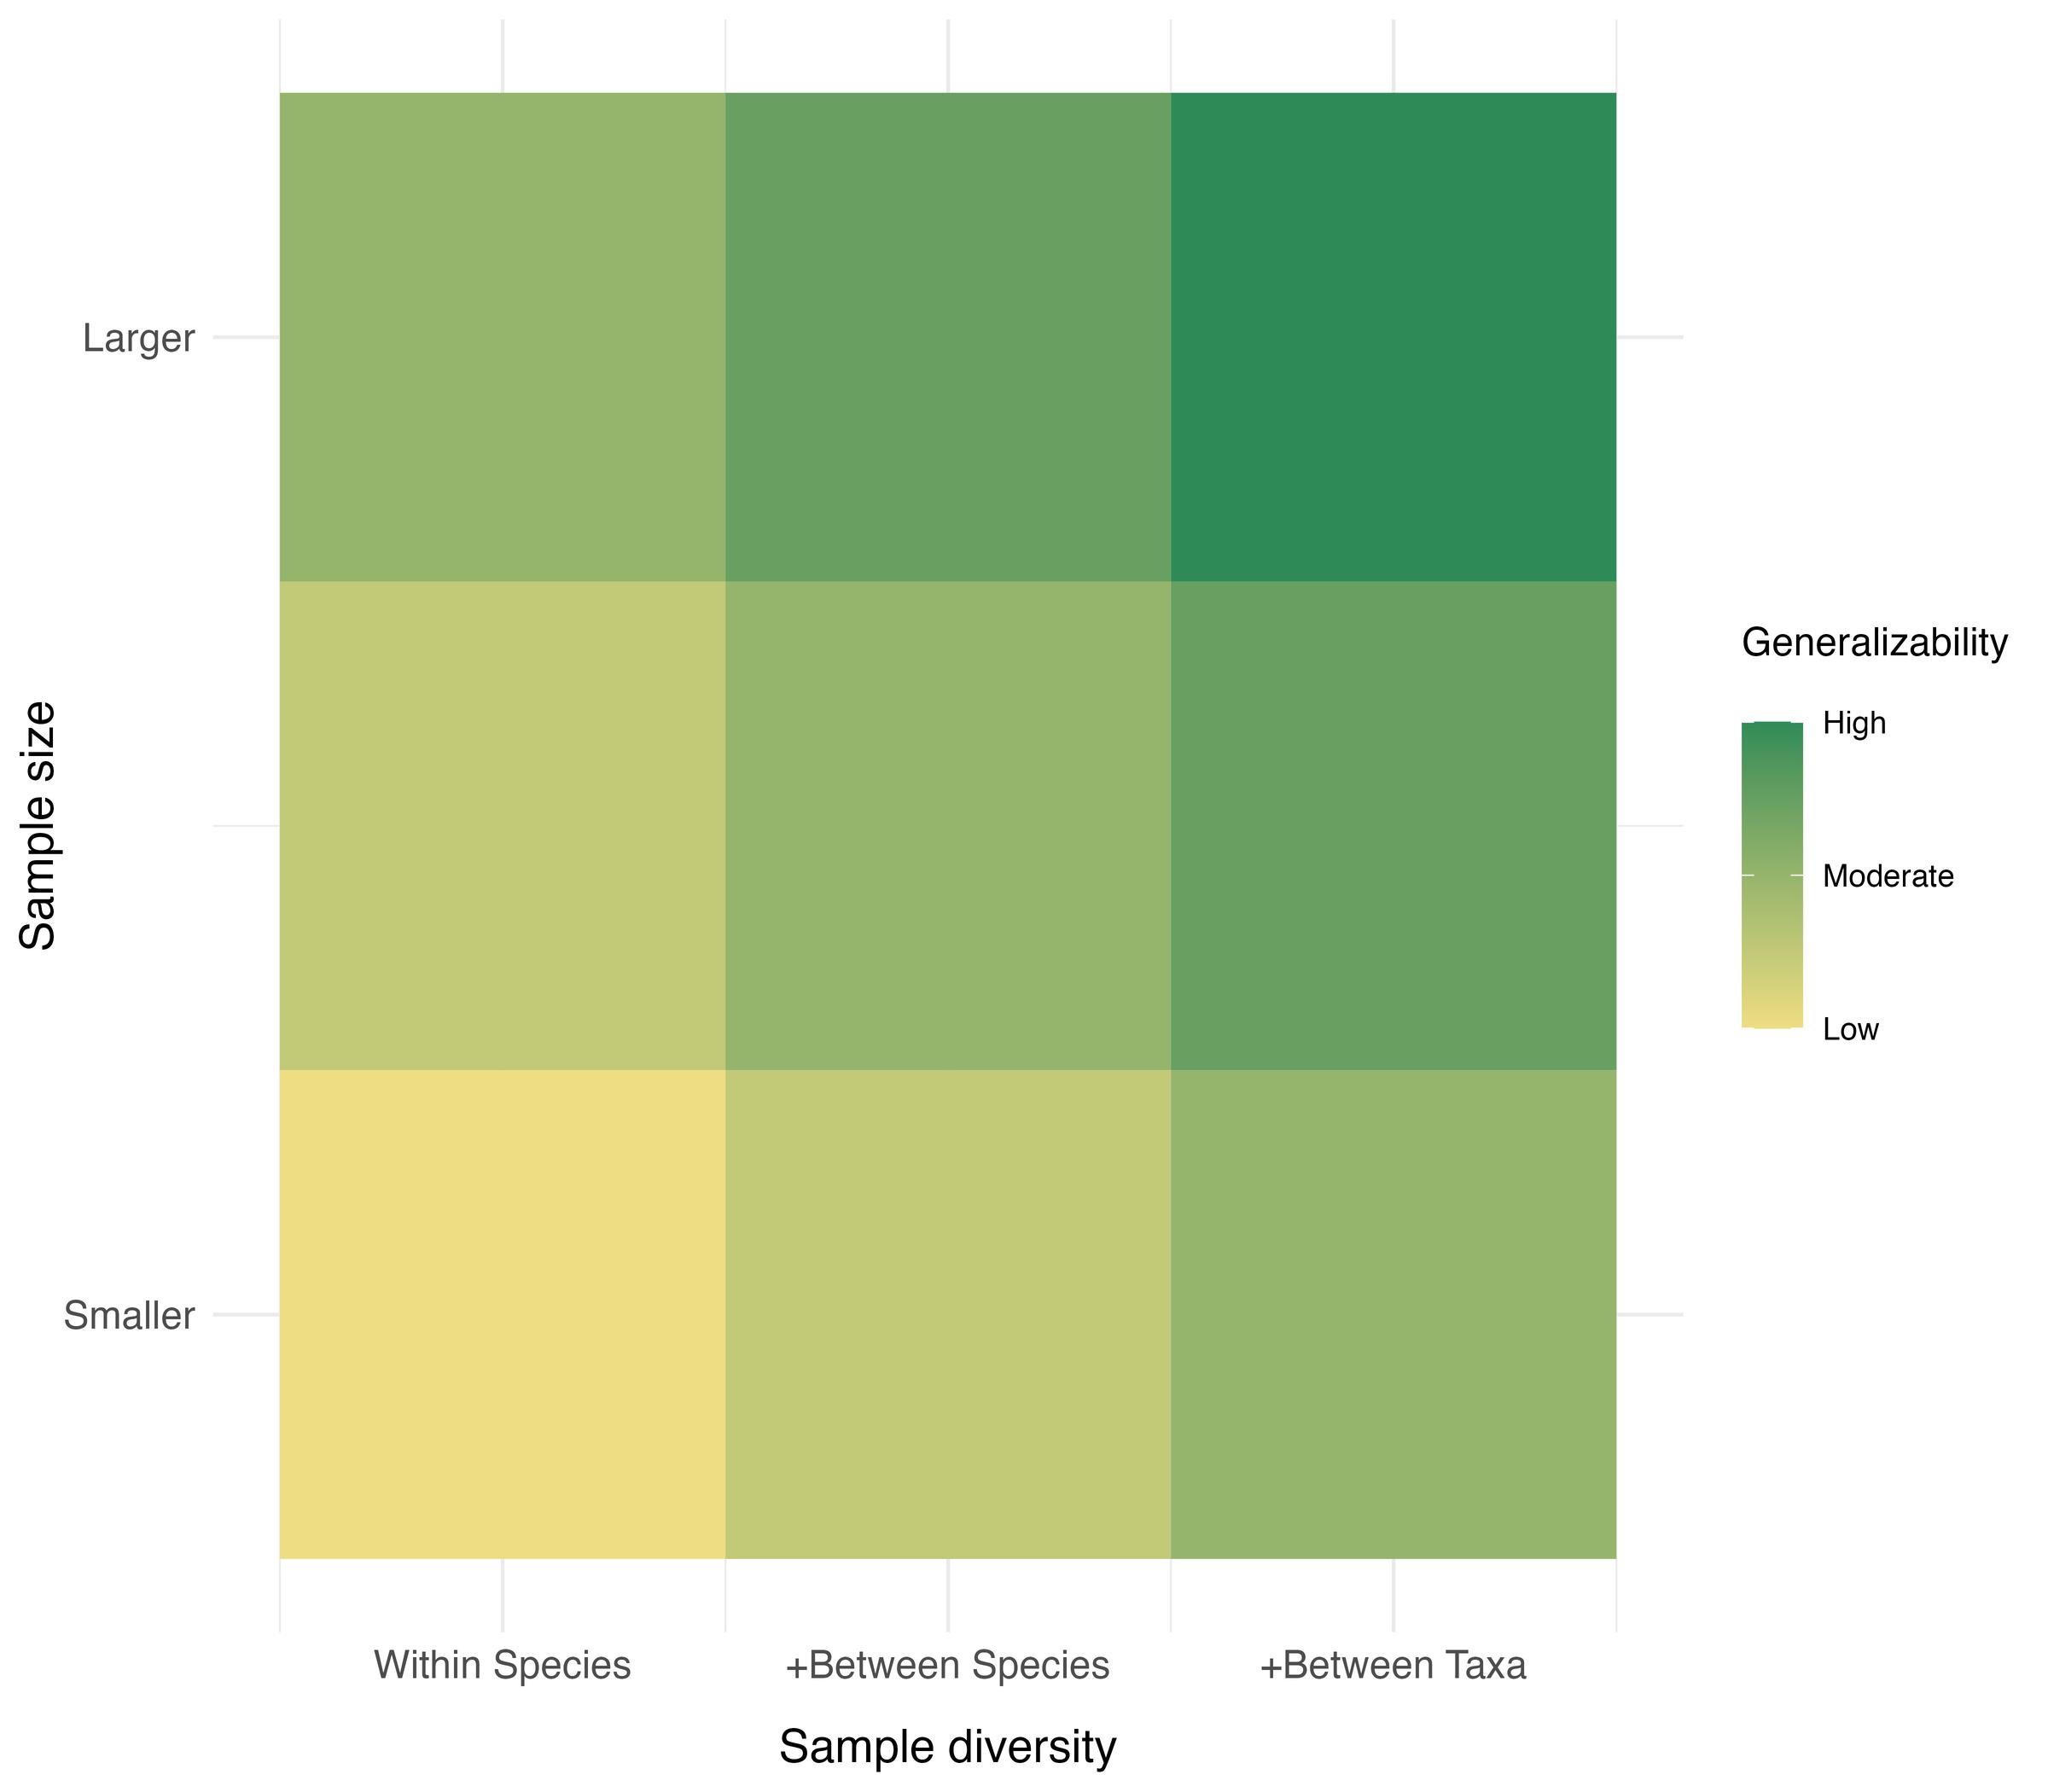 Figure 1. A heatmap illustrating, in principle, how the generalizability of findings relates to sample size and sample diversity. The horizontal (x) axis represents different ranges of sample diversity by considering different sources of variability (within-species, between-species, and between-taxa). The vertical (y) axis represents different ranges of sample size. The color shows the overall theoretical generalizability of findings if we assume that sample size and sample diversity have the same impact on generalizability